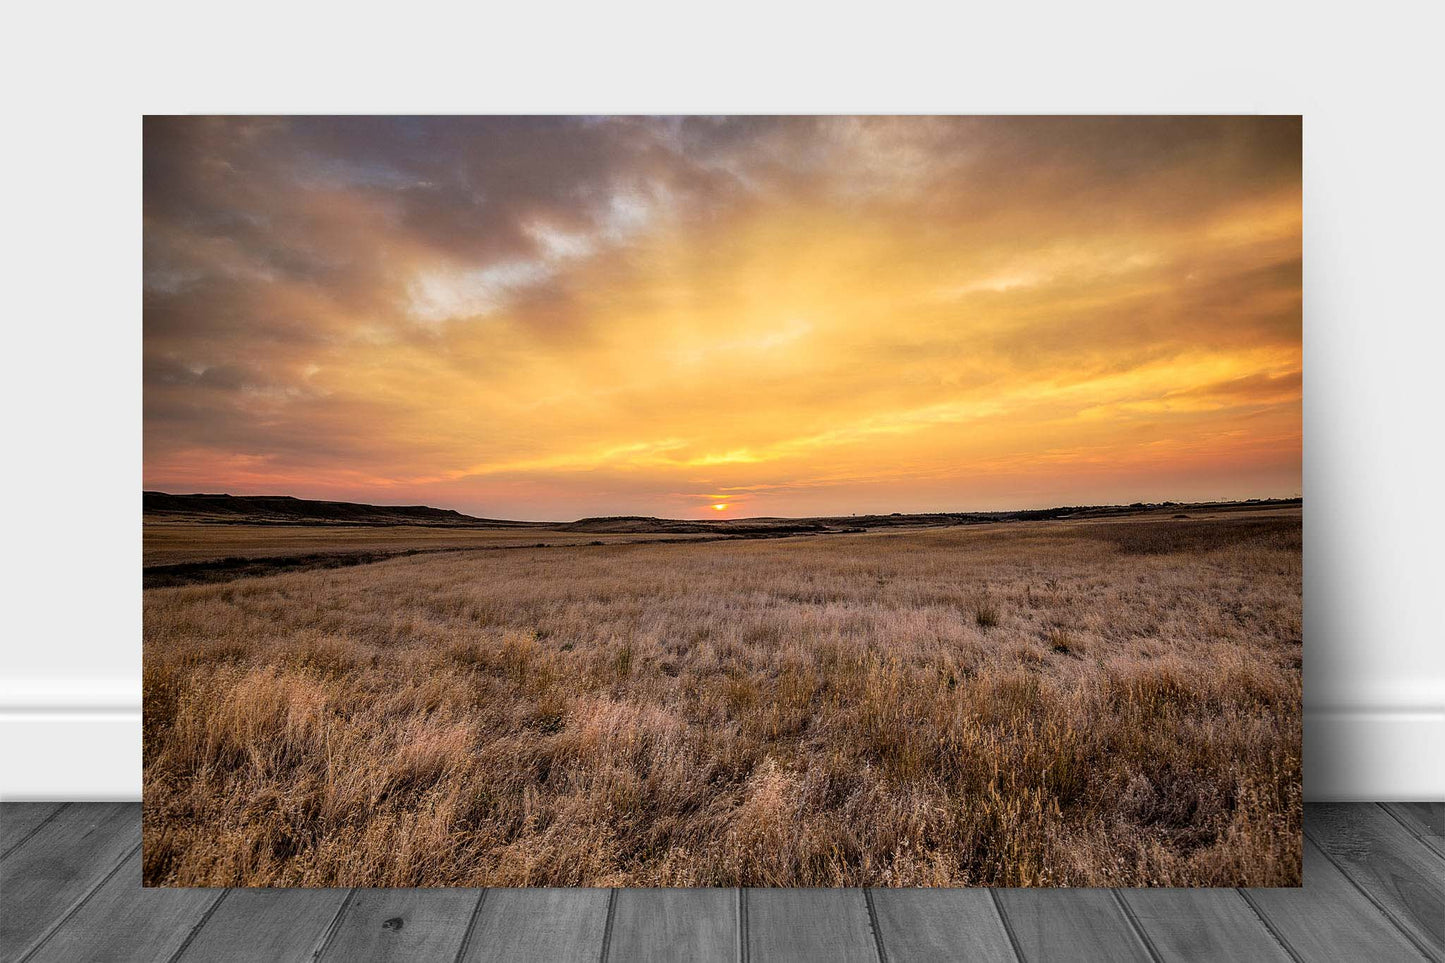 Western metal print on aluminum of a golden sunrise over the prairie on an autumn morning on the northern plains of Montana by Sean Ramsey of Southern Plains Photography.